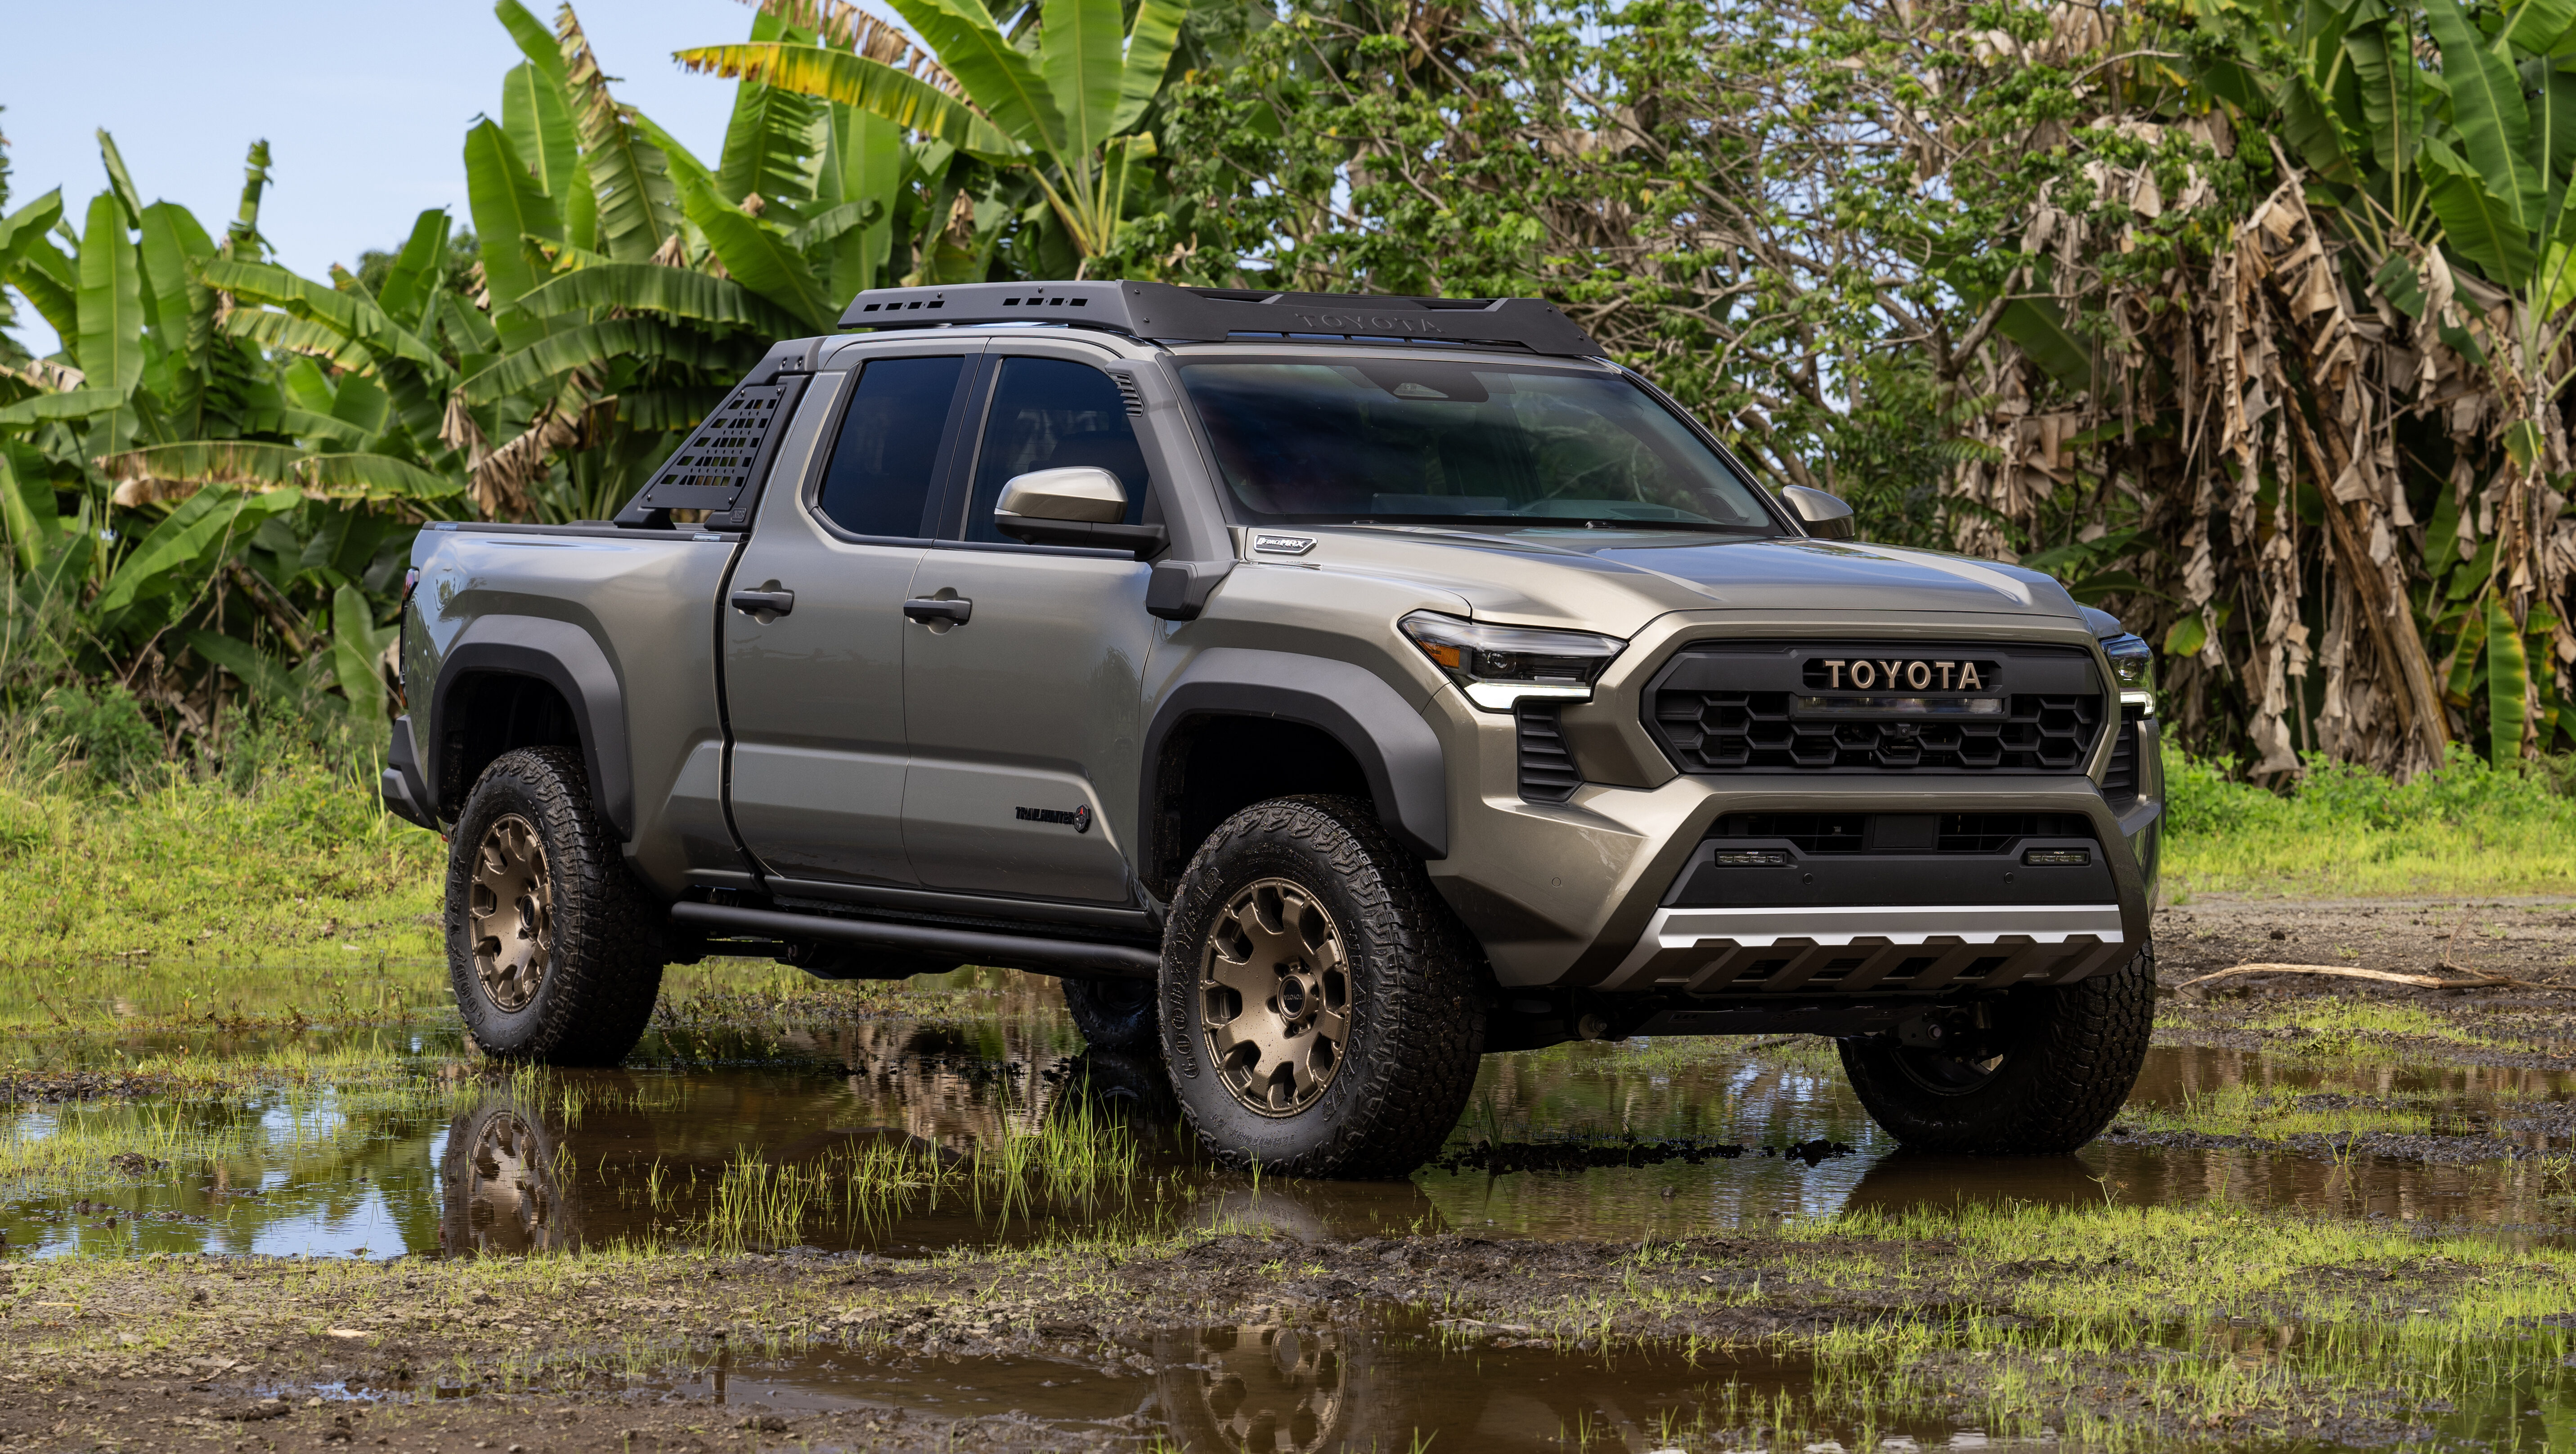 How would you customize your 2024 Toyota Tacoma order based on the leaked order book?